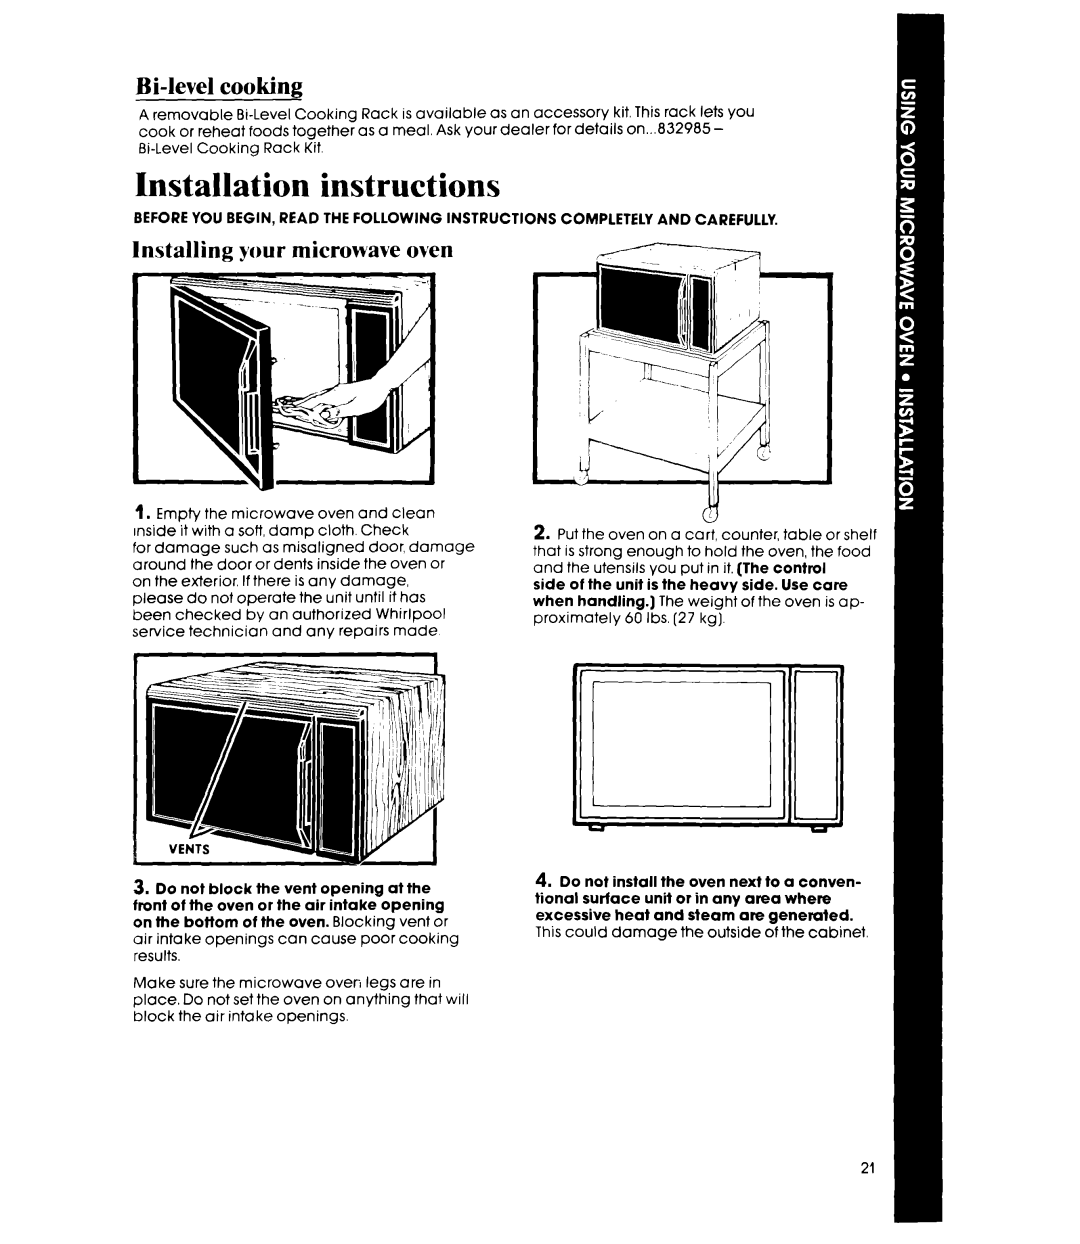 Whirlpool MW8600XS manual Installation instructions, Bi-levelcooking, Installing your microwave oven 